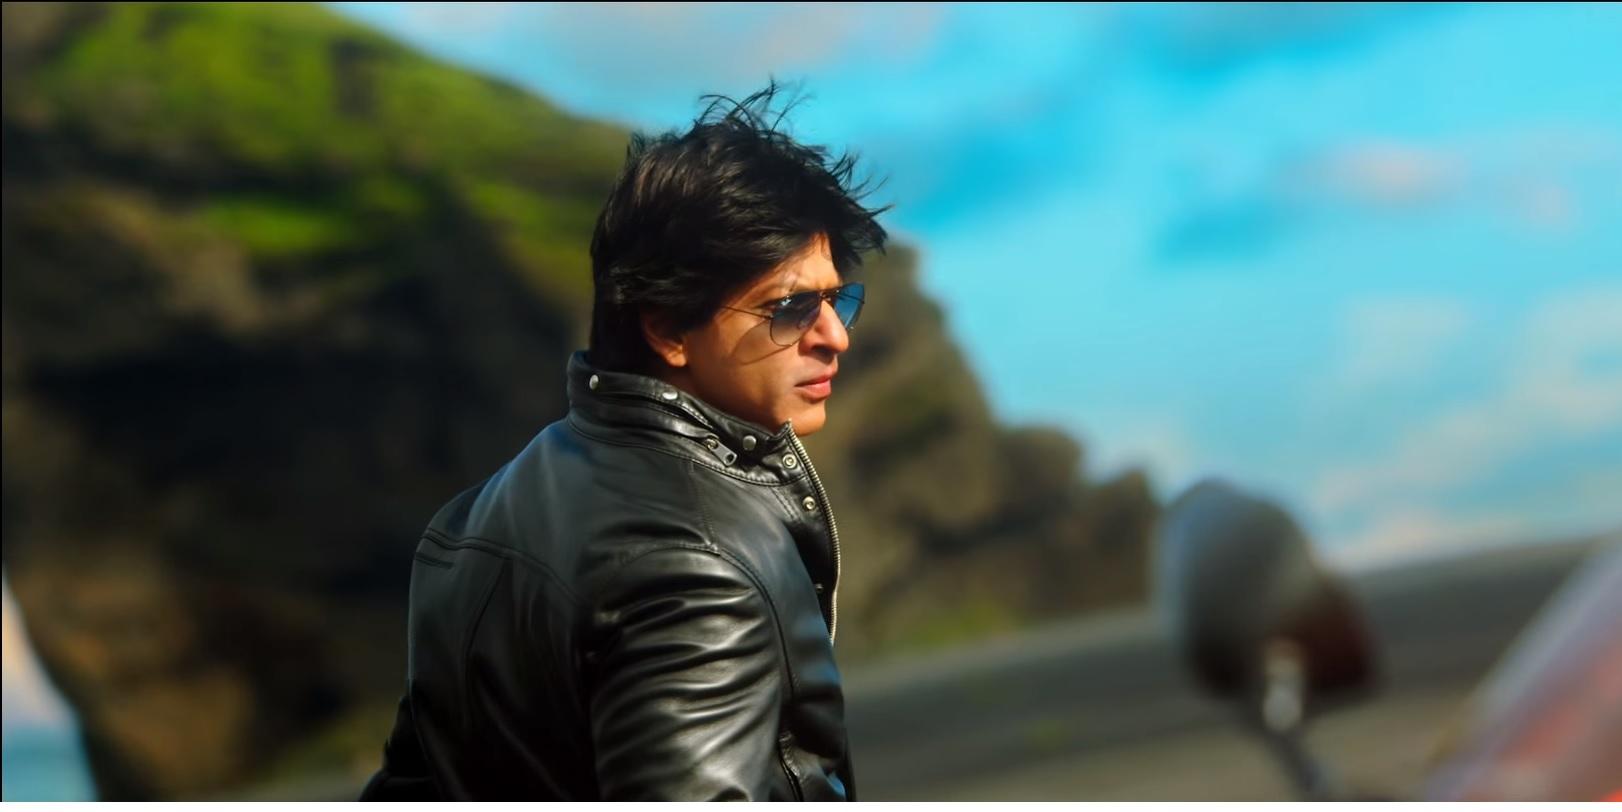 download mp3 full songs of dilwale 2015